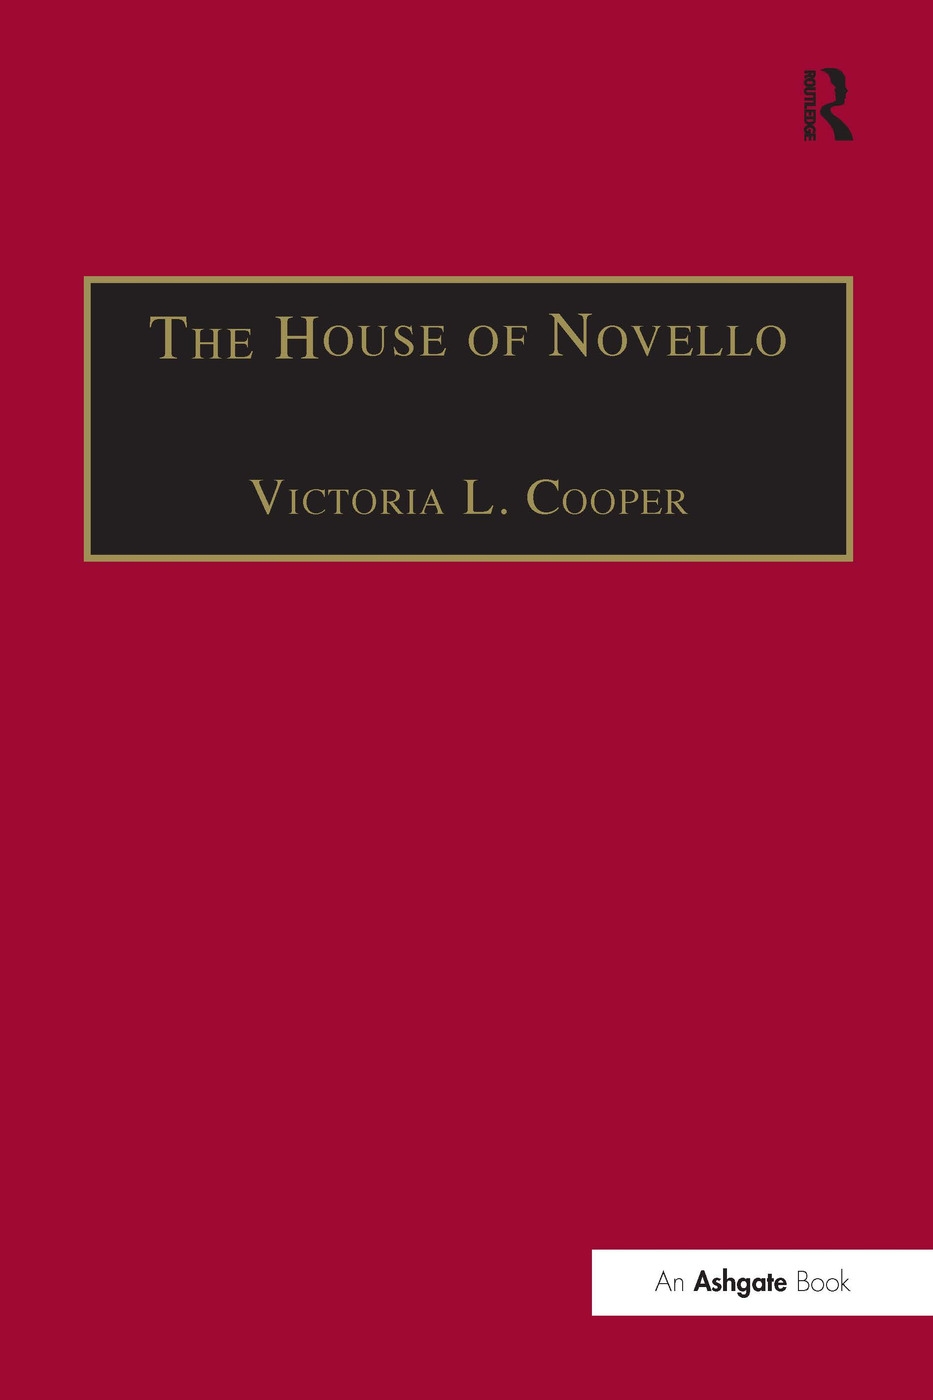 The House of Novello: Practice and Policy of a Victorian Music Publisher, 1829-1866